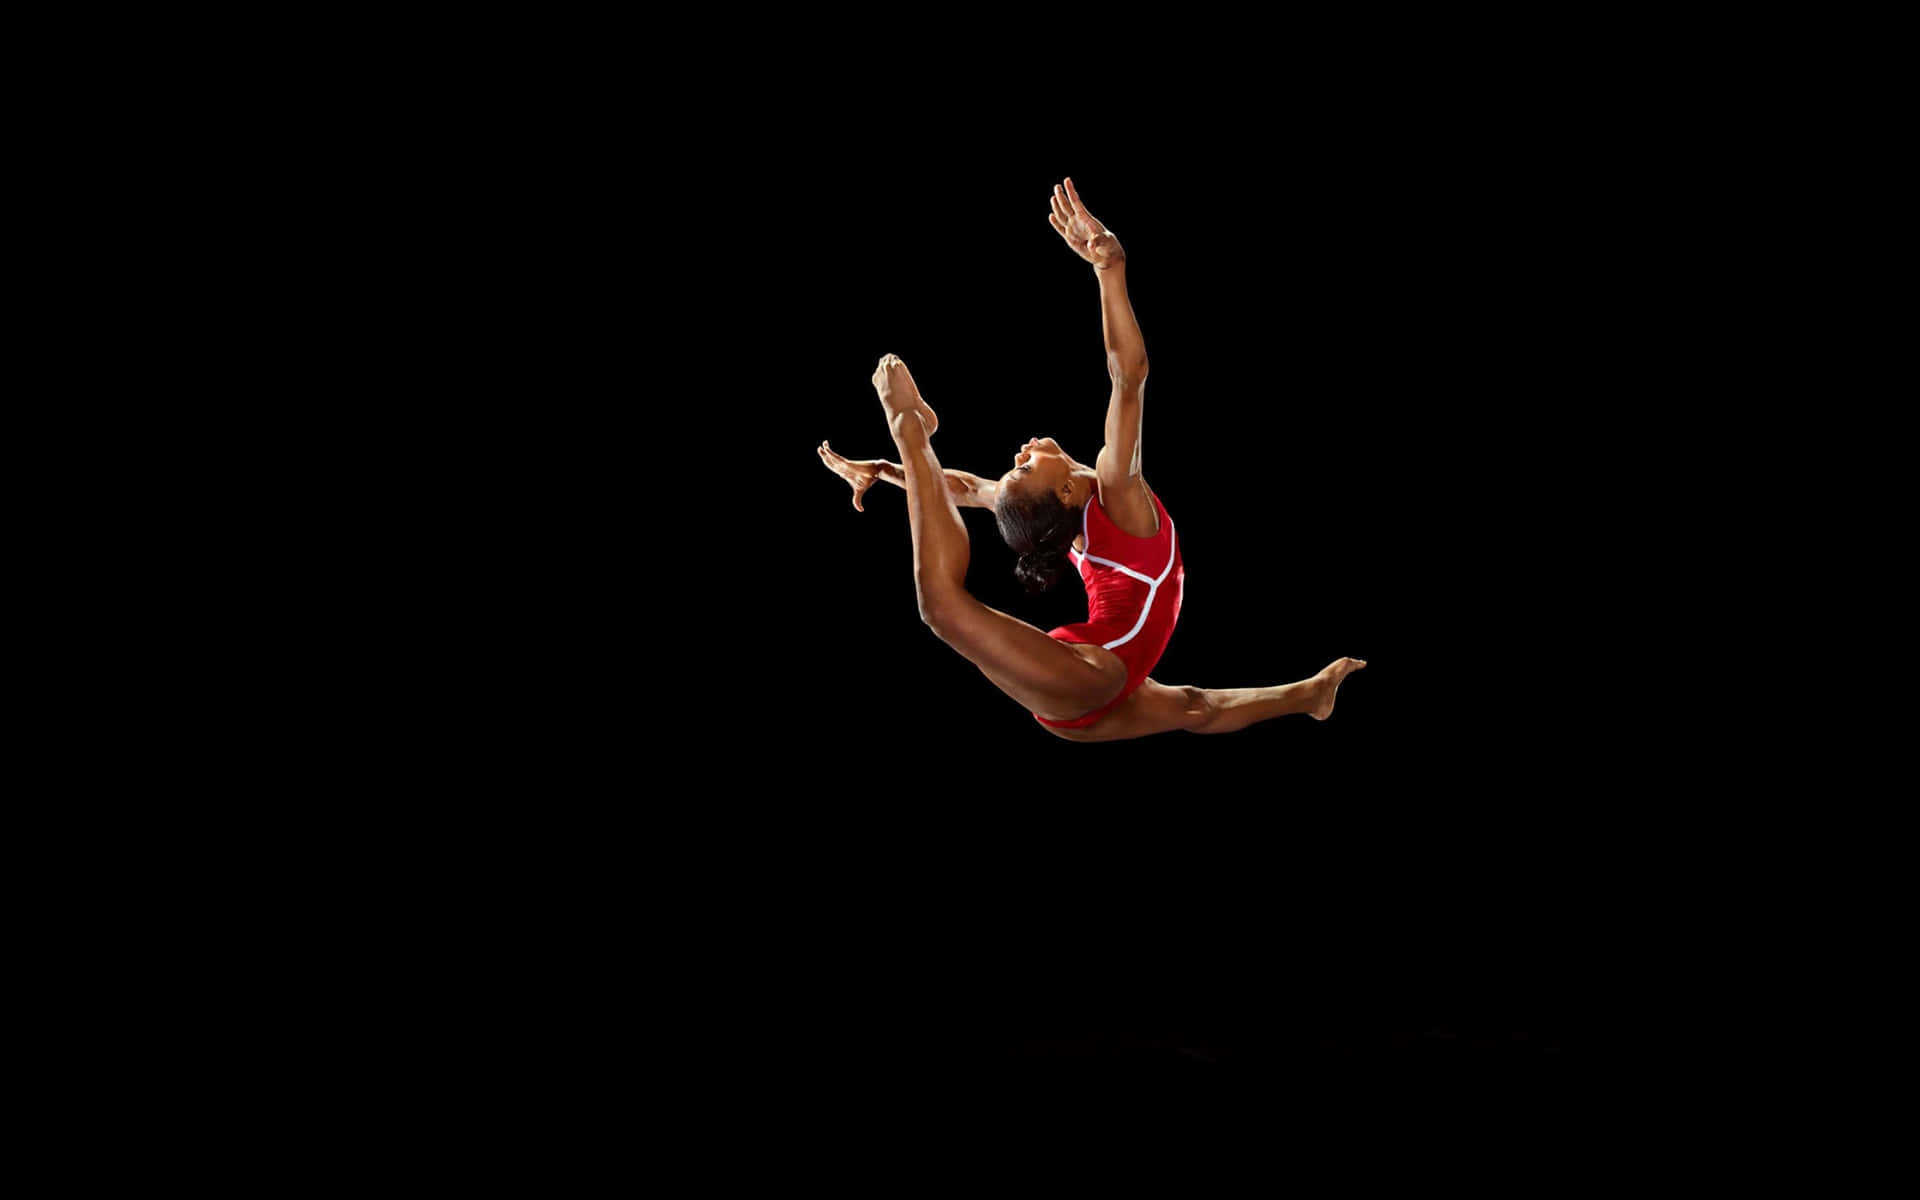 Captivating Gymnast in Mid-Air